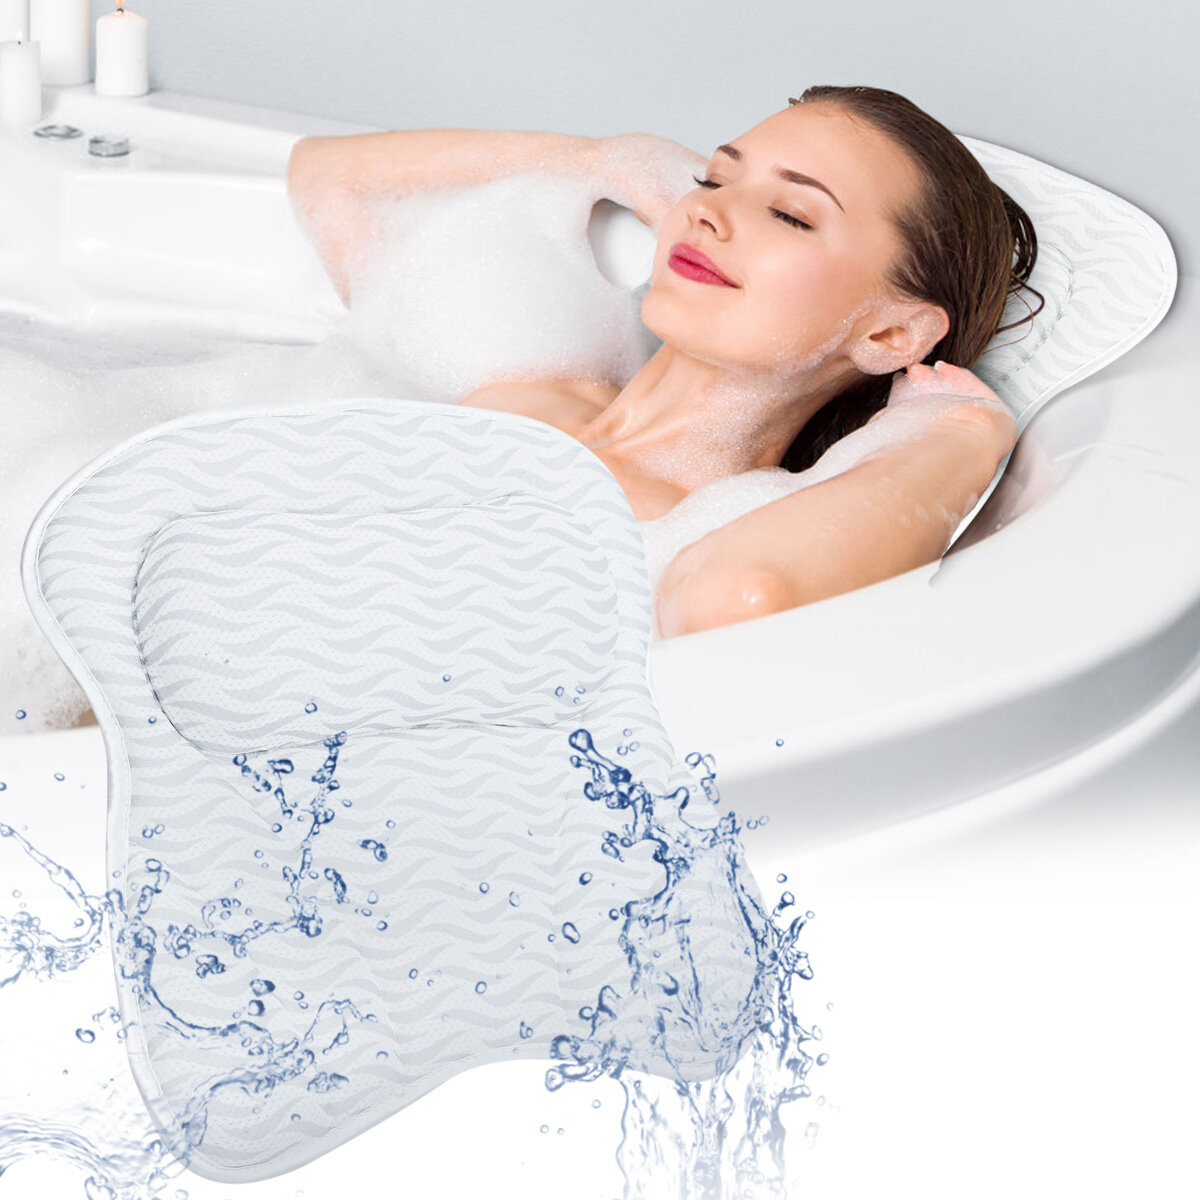 Yeerswag Bath Pillow Spirity Ergonomic With Neck And Back Support Comfortable Bathtub Pillows For Relaxation